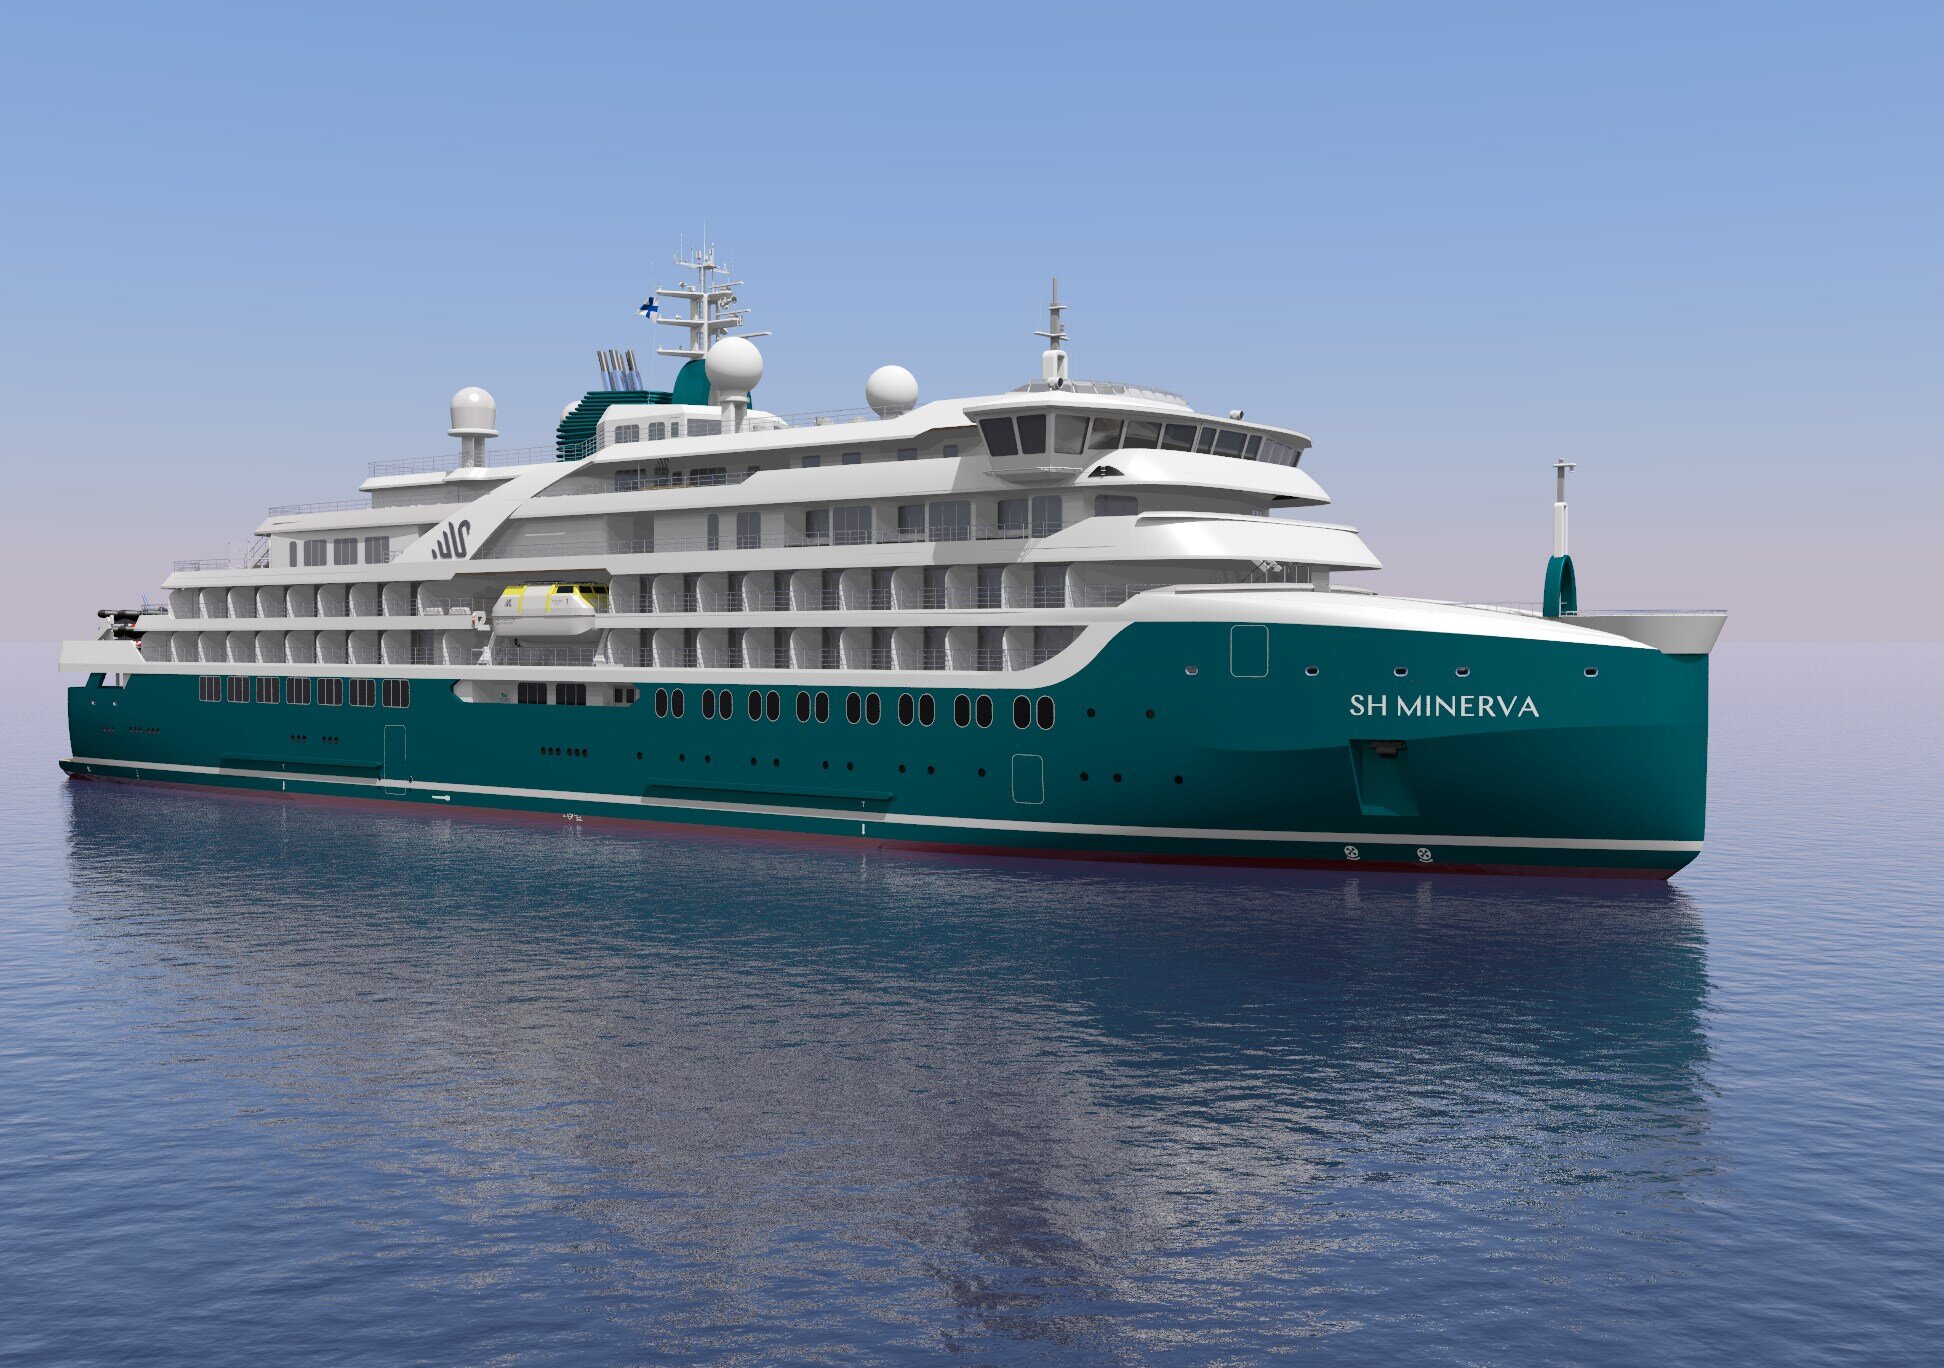   Rendering of the Vega-class ship from Swan Hellenic (photo credit: Swan Hellenic)  